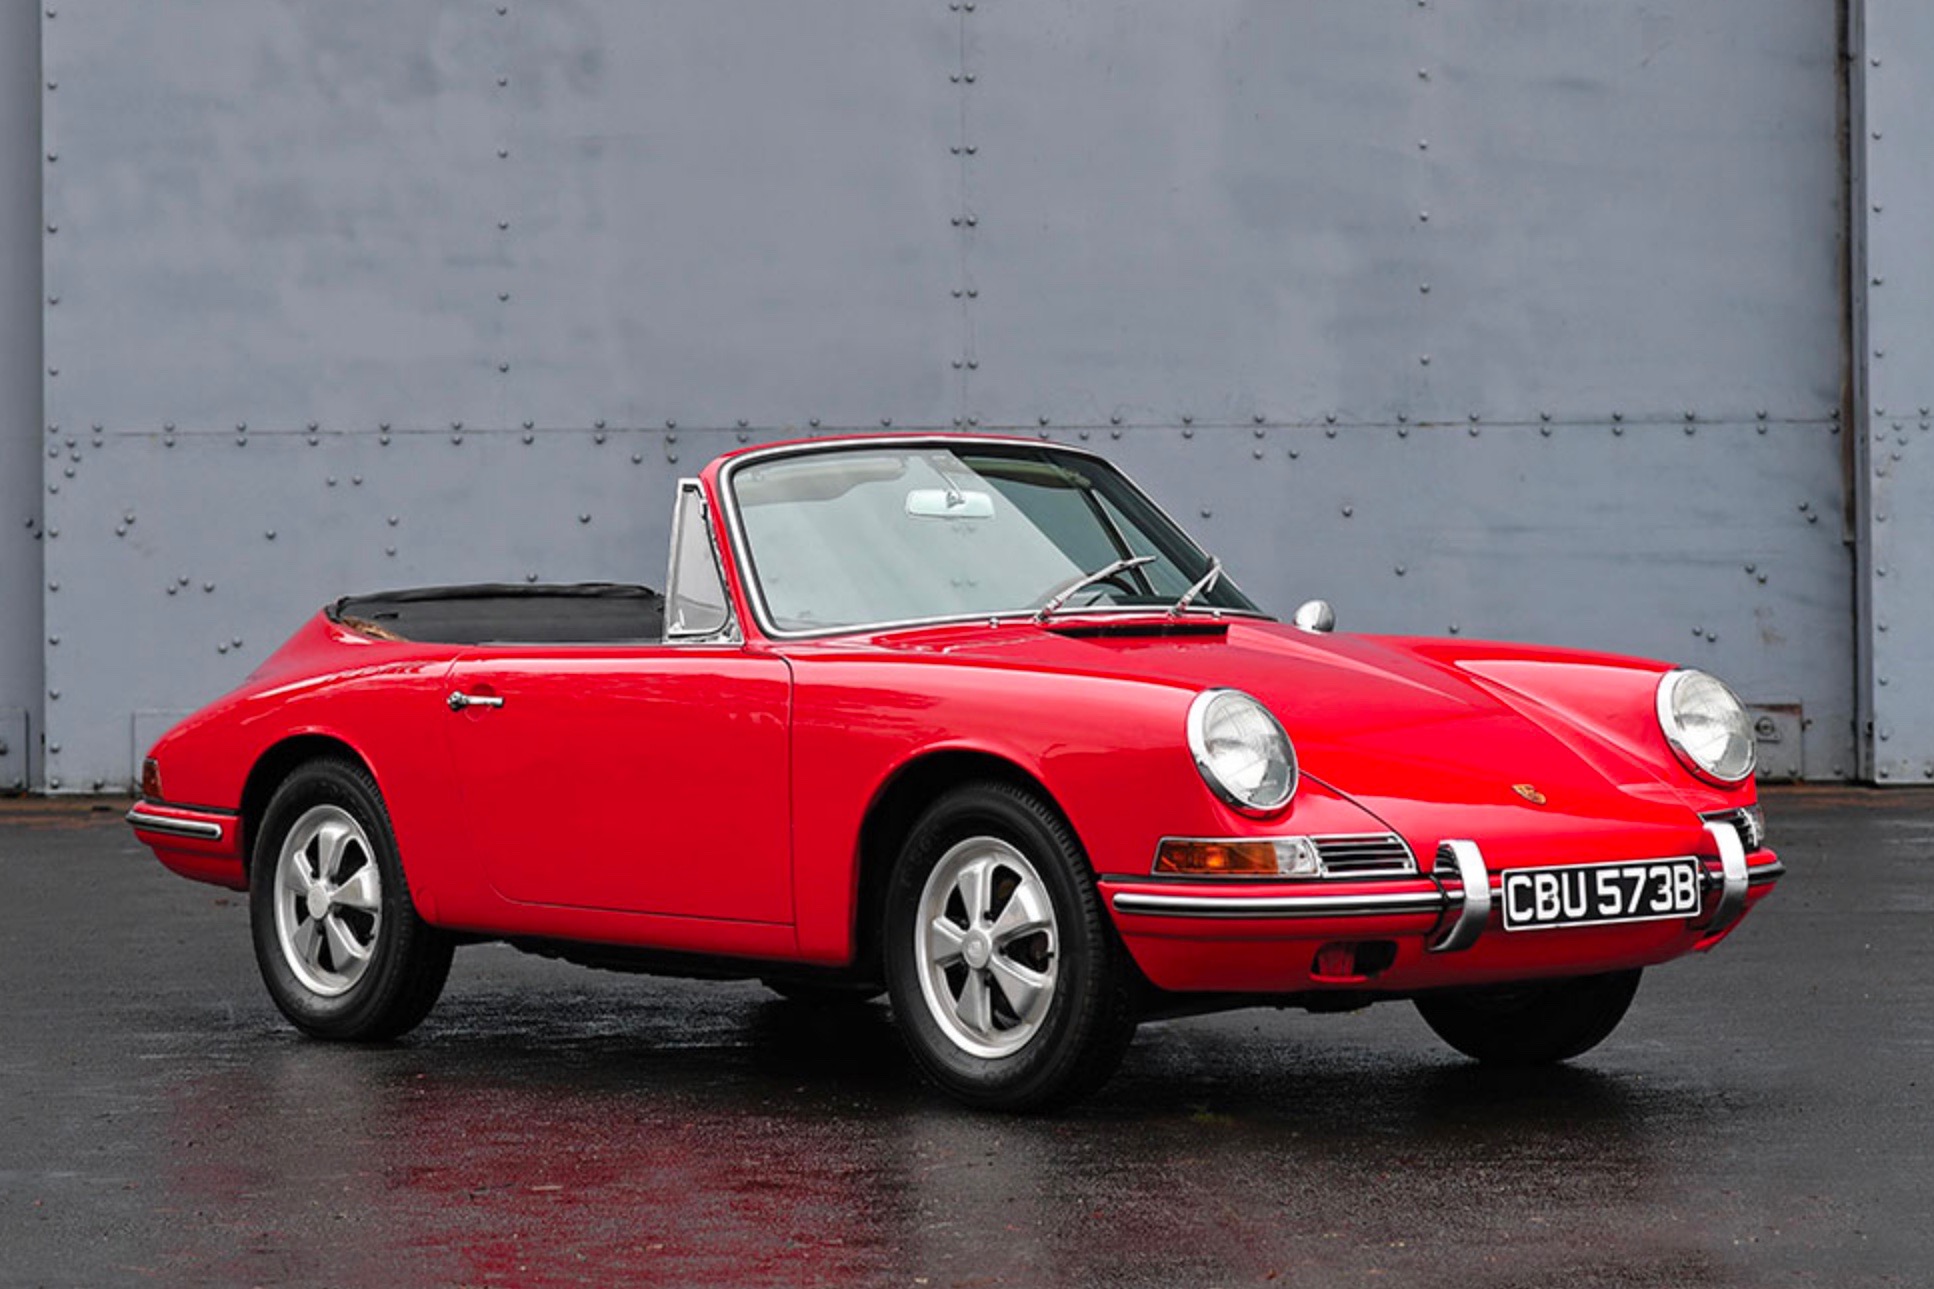 For Sale: First-ever Porsche 911 Cabriolet going up for auction